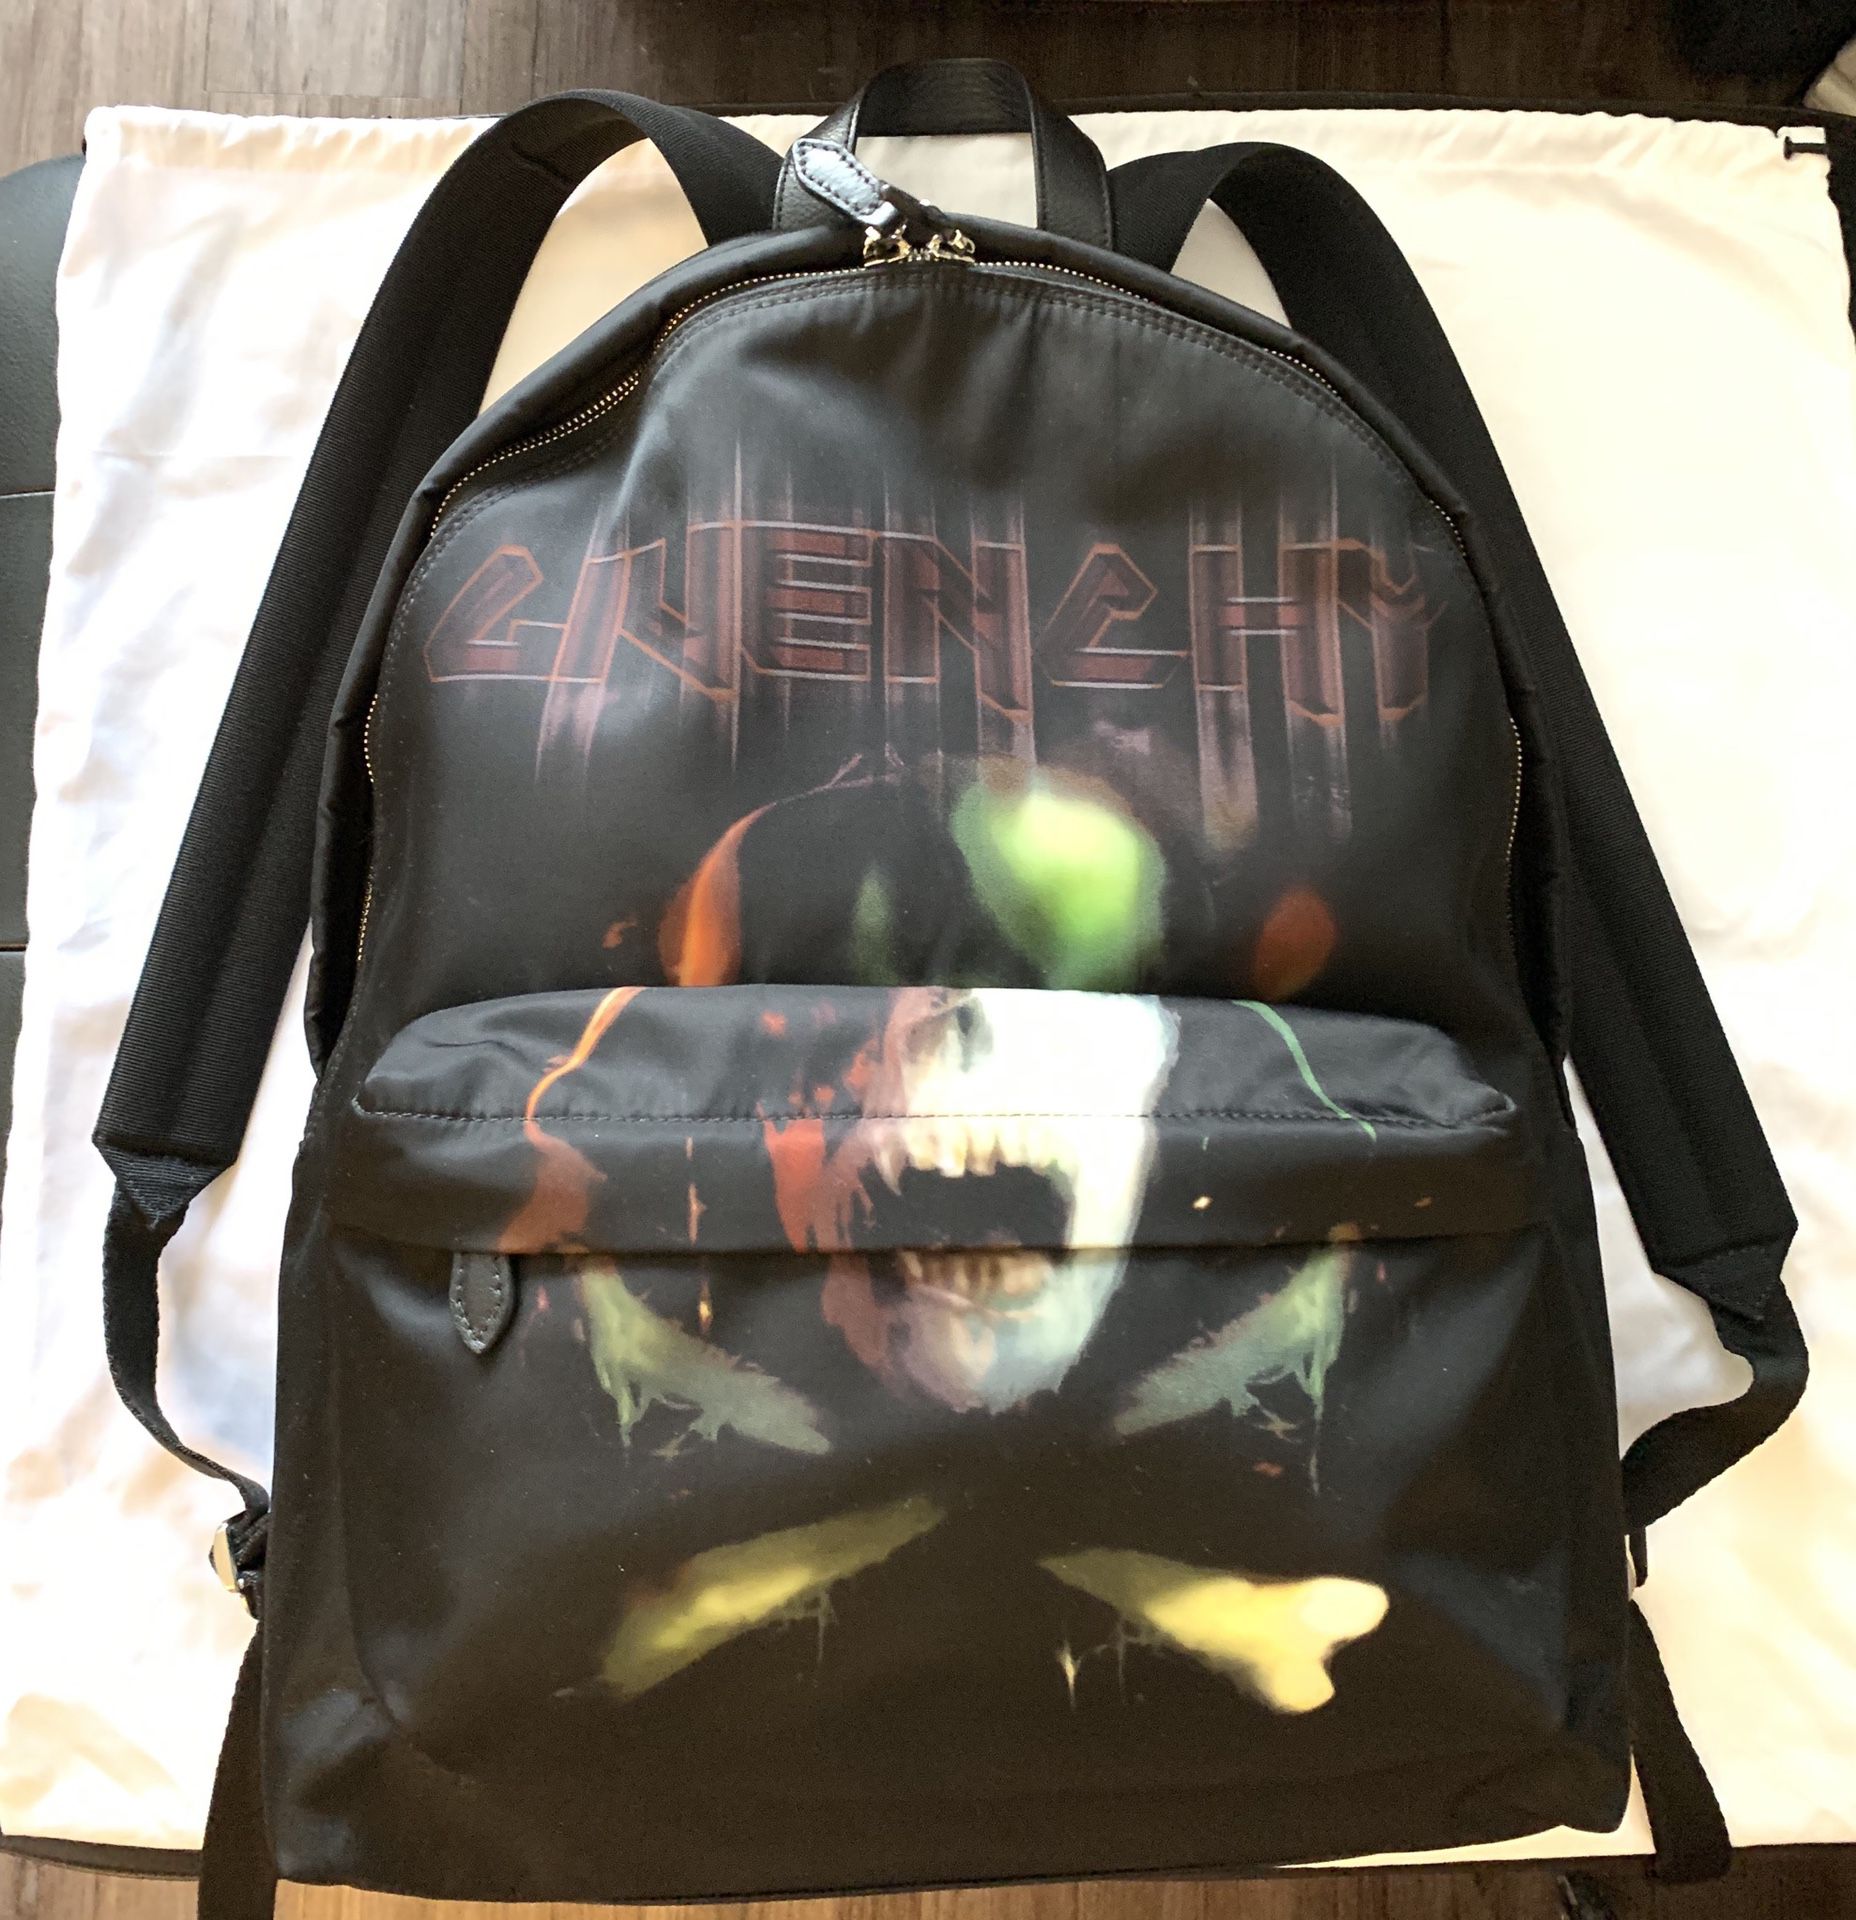 NEW GIVENCHY ARMY SKULL Heavy Metal BACKPACK W/ TAGS. Comes with dust bag. Amazing print !!!